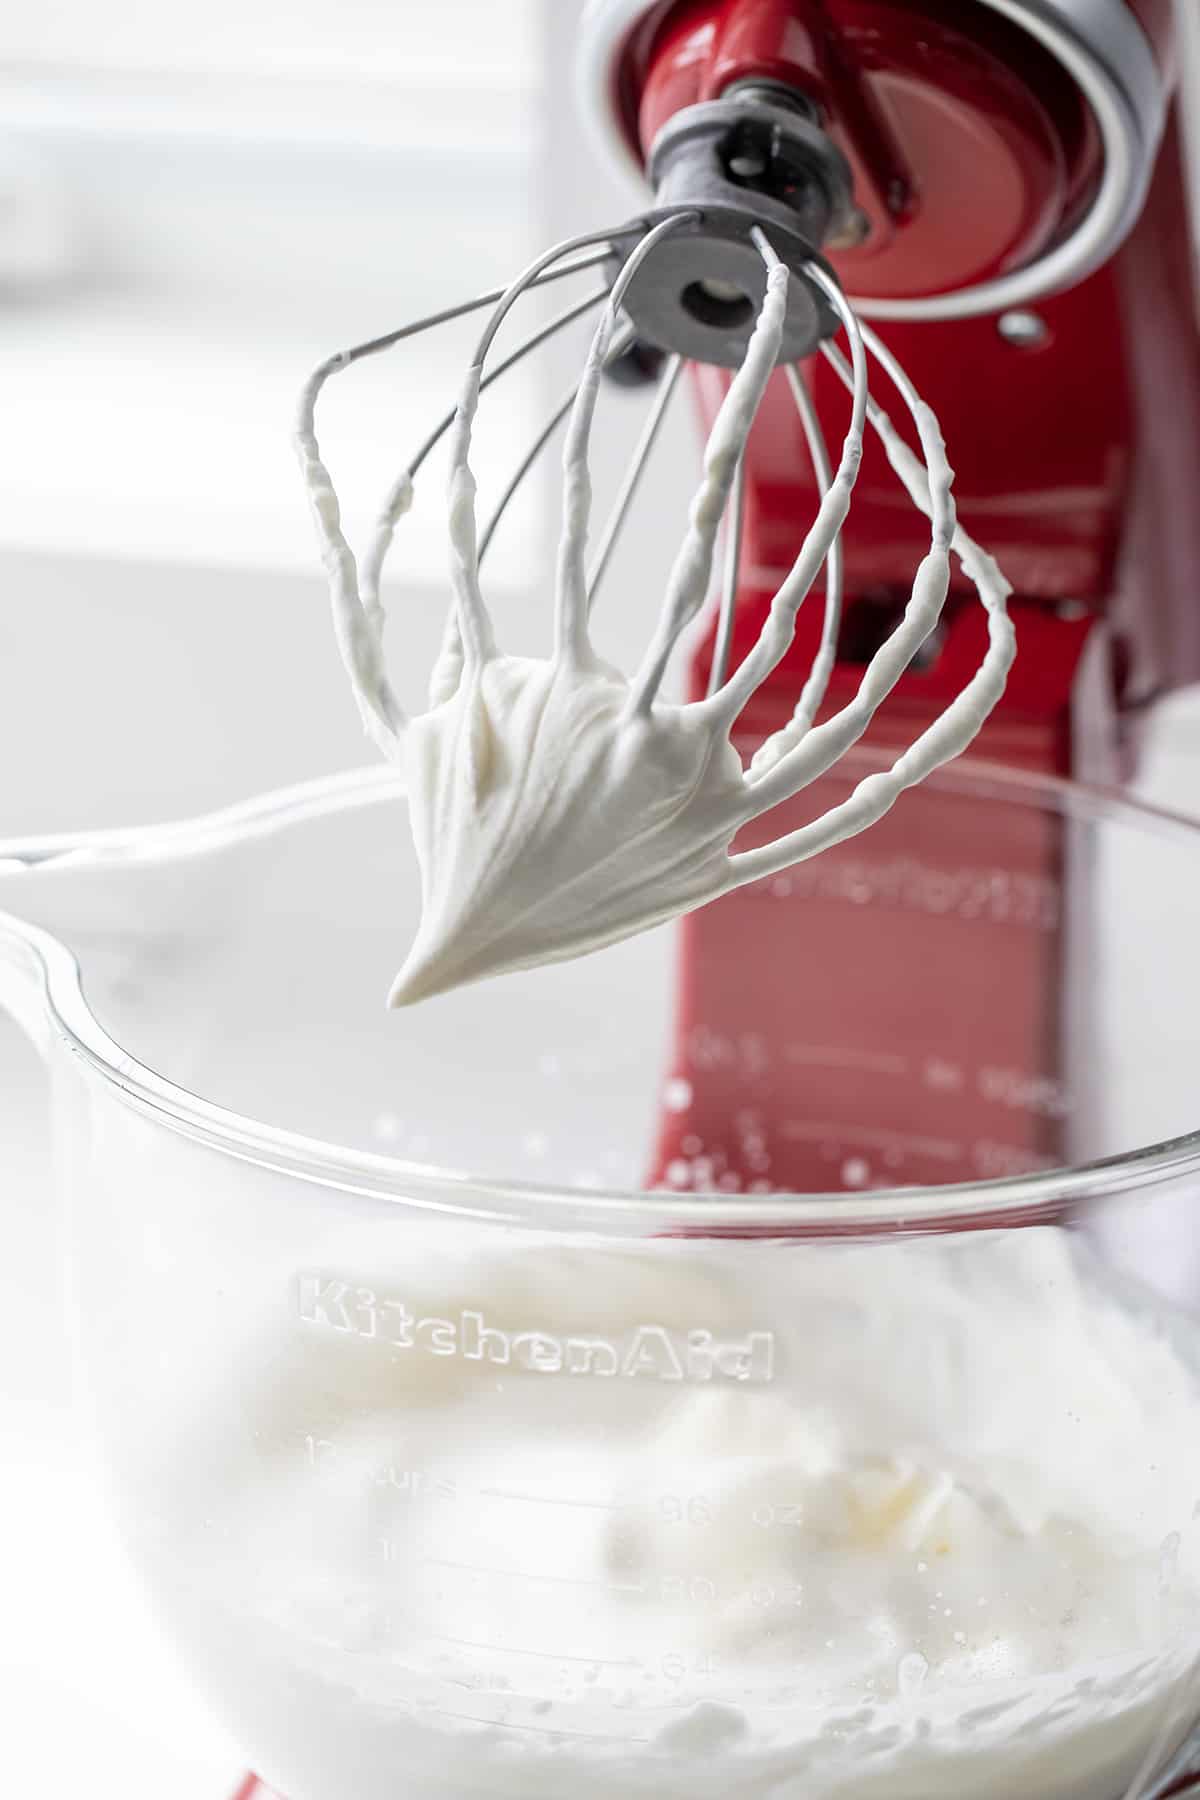 Mixer with whisk attachment with whipped cream on it, showing the stiff peaks.